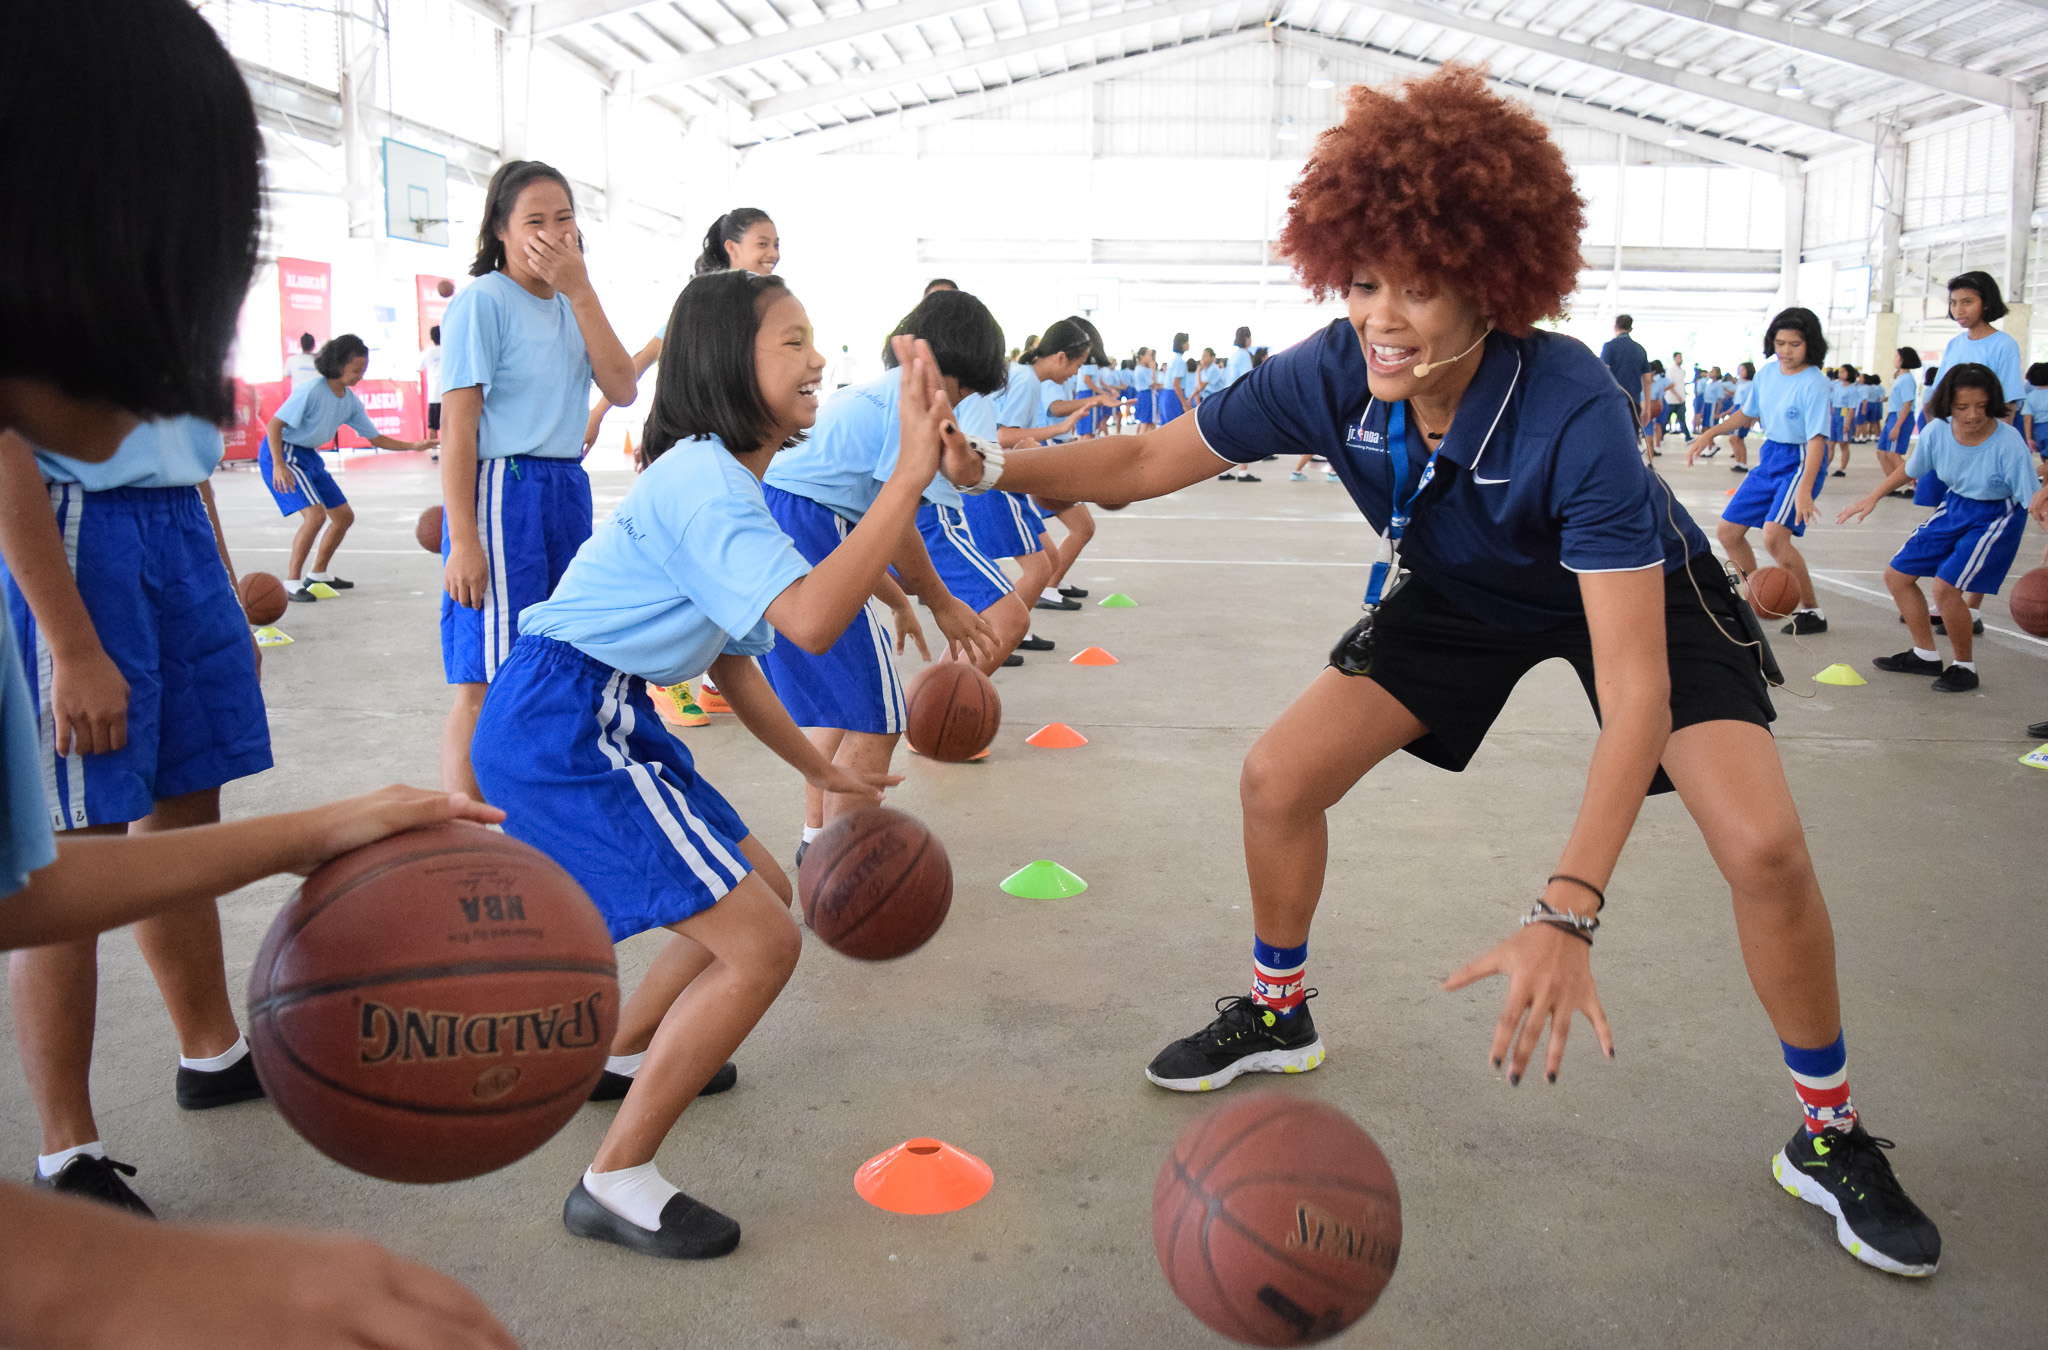 Jr. NBA PH conducts clinic for more than 3,000 kids in Cavite